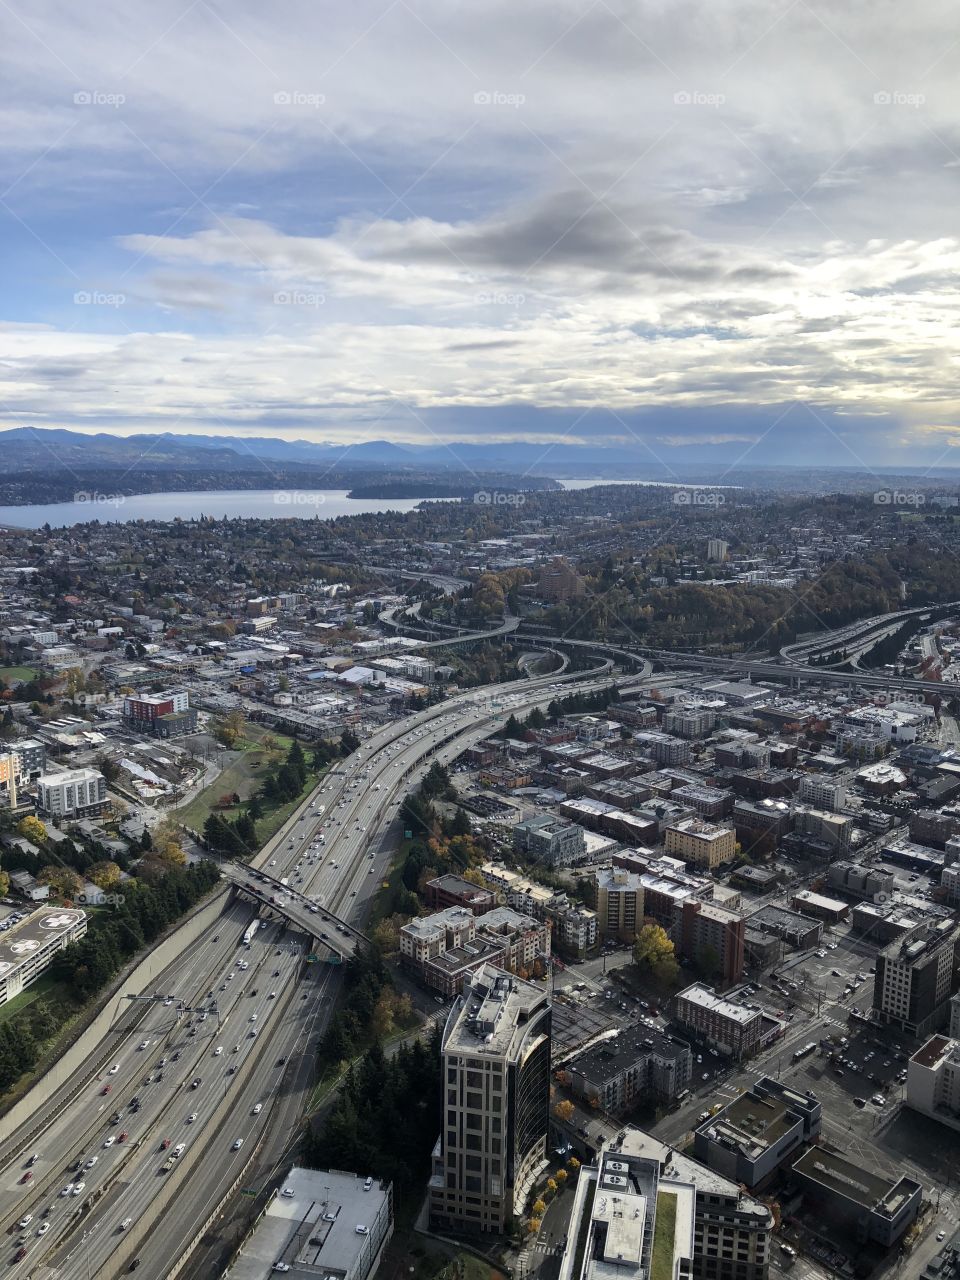 Breathtaking views from the highest point in Seattle, WA 